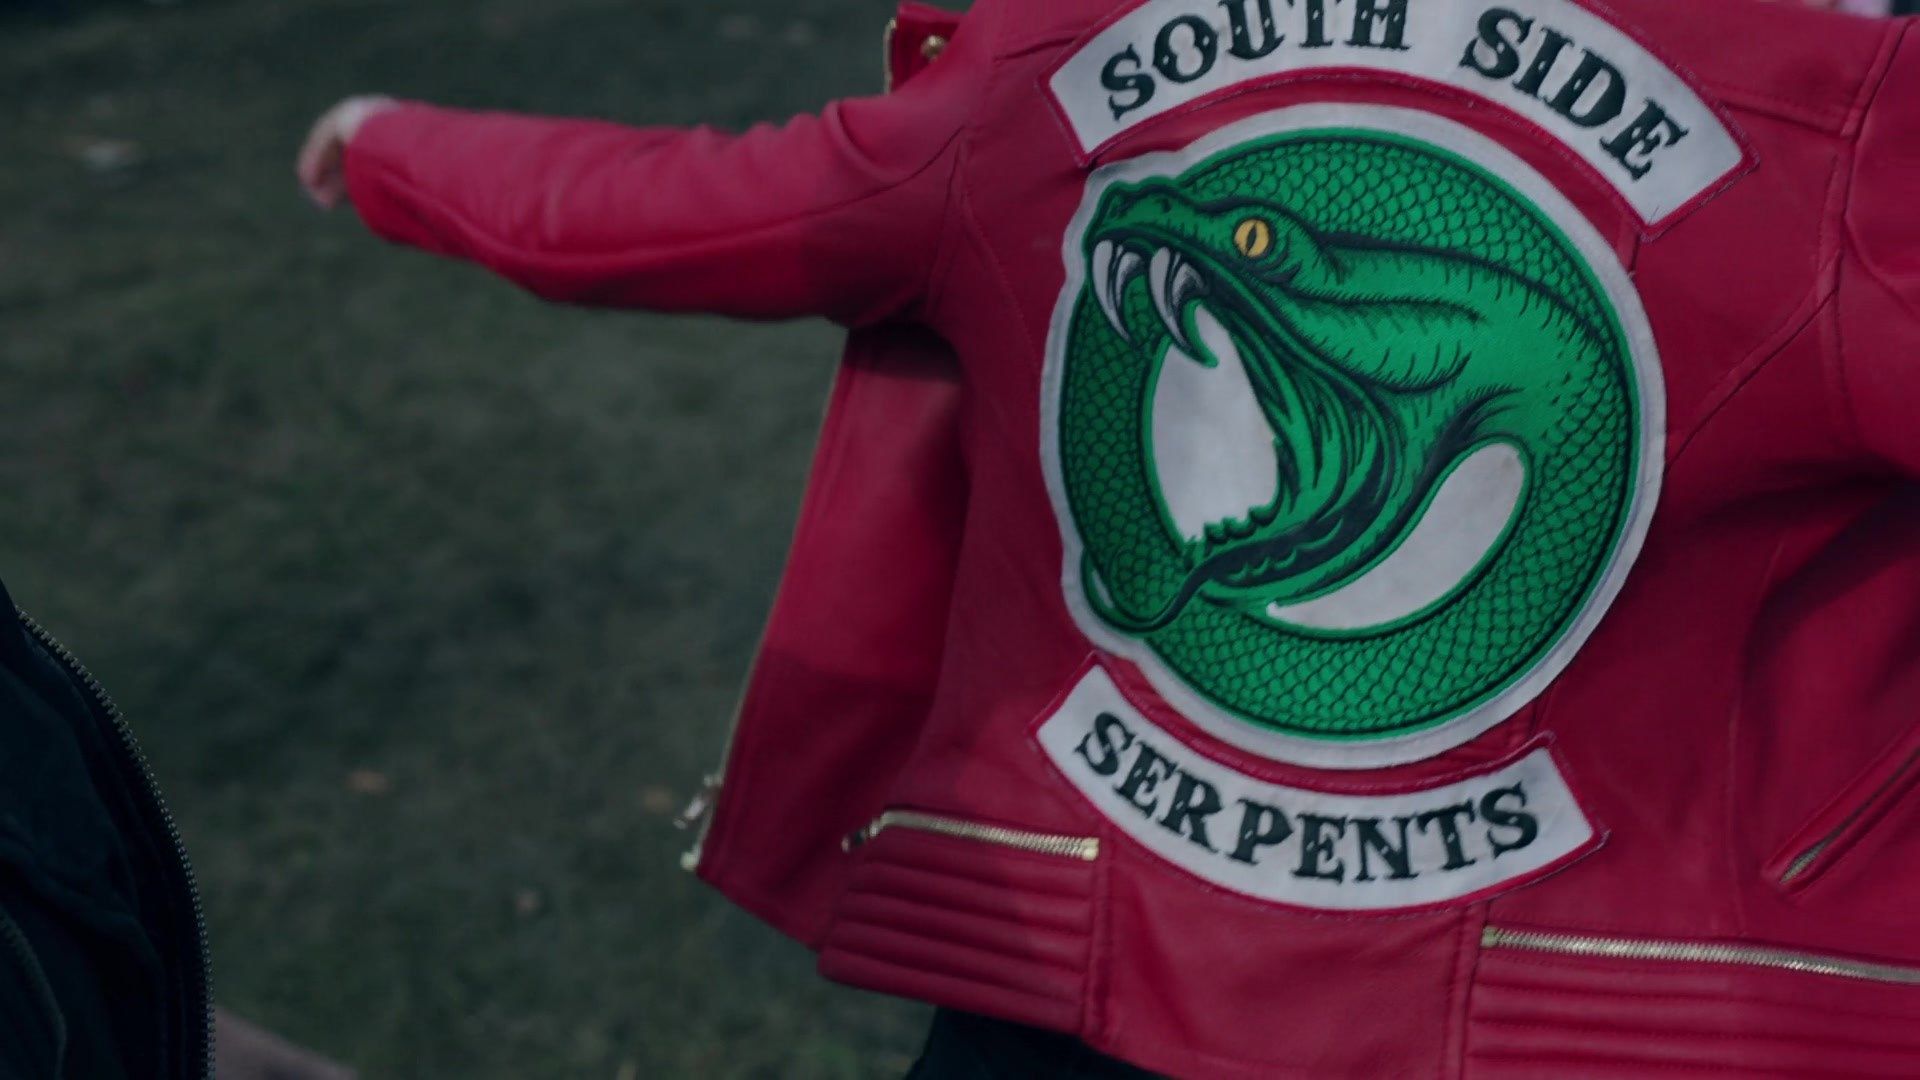 Southside Serpents Wallpapers